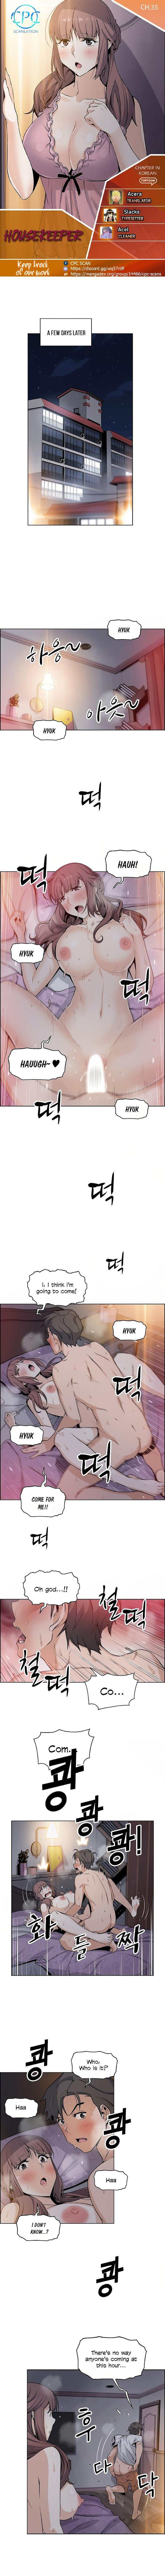 Housekeeper [Neck Pillow, Paper] Ch.49/49 [English] [Manhwa PDF] Completed 314